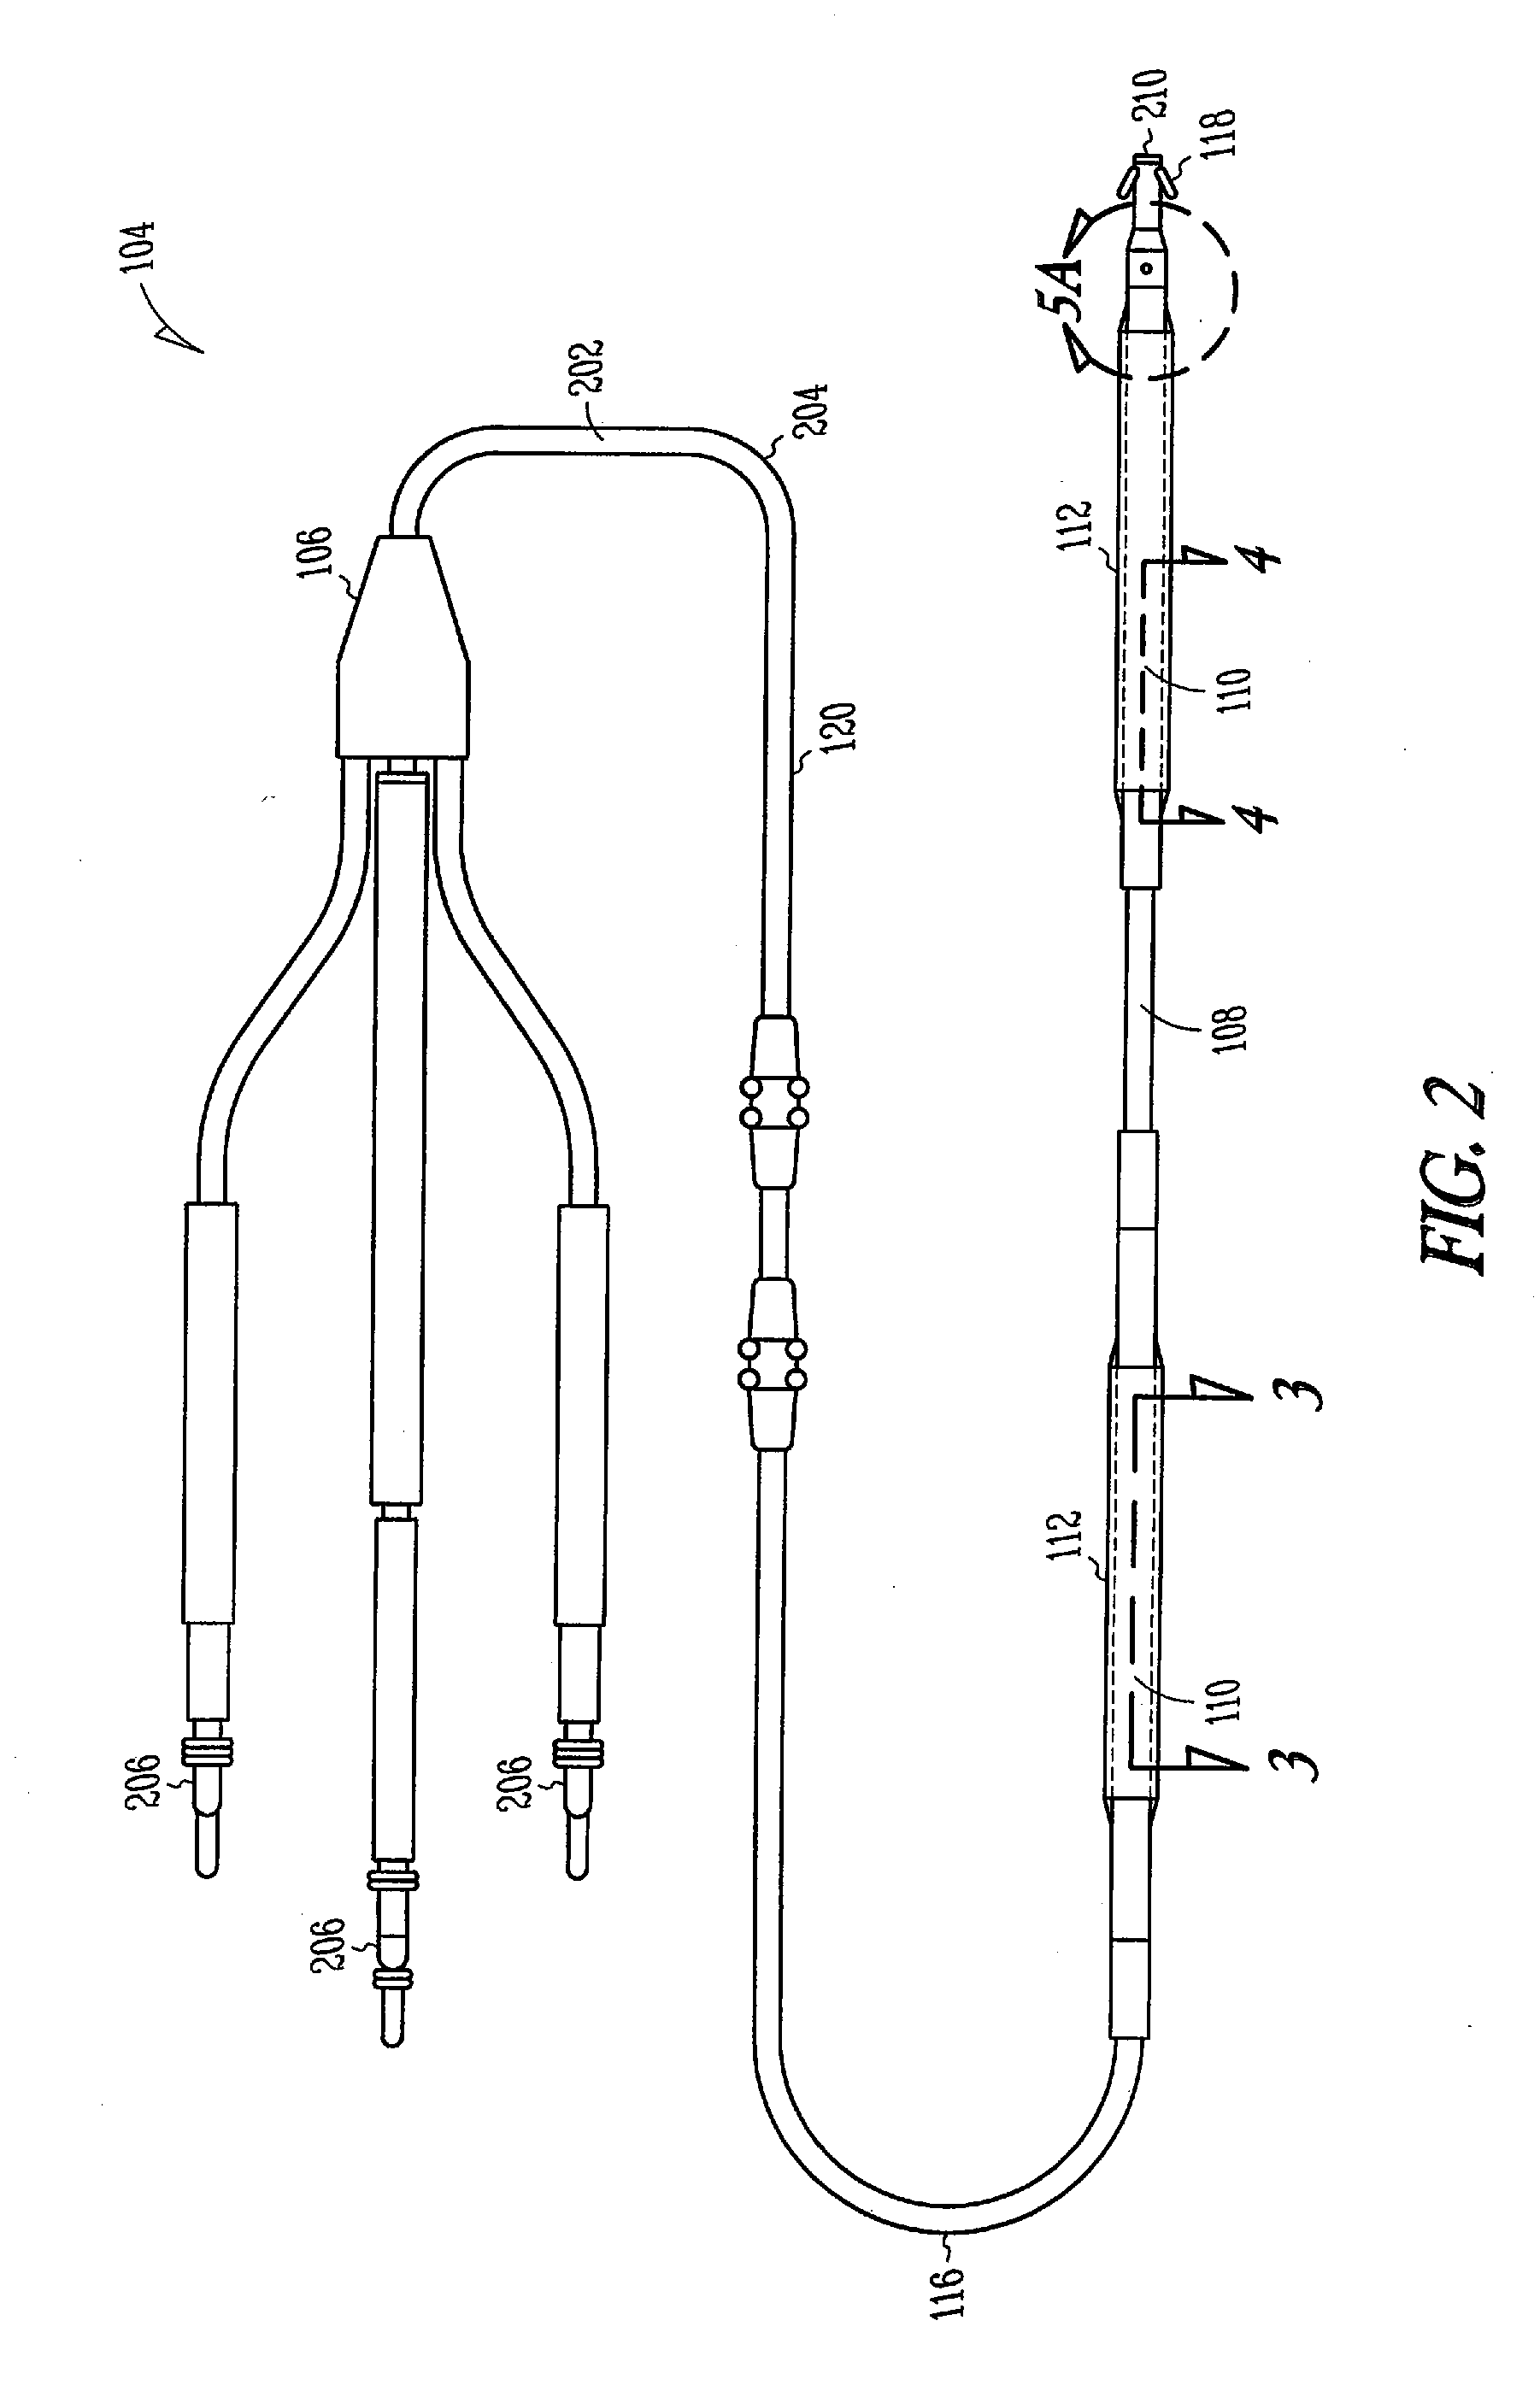 Fibrosis-limiting material attachment